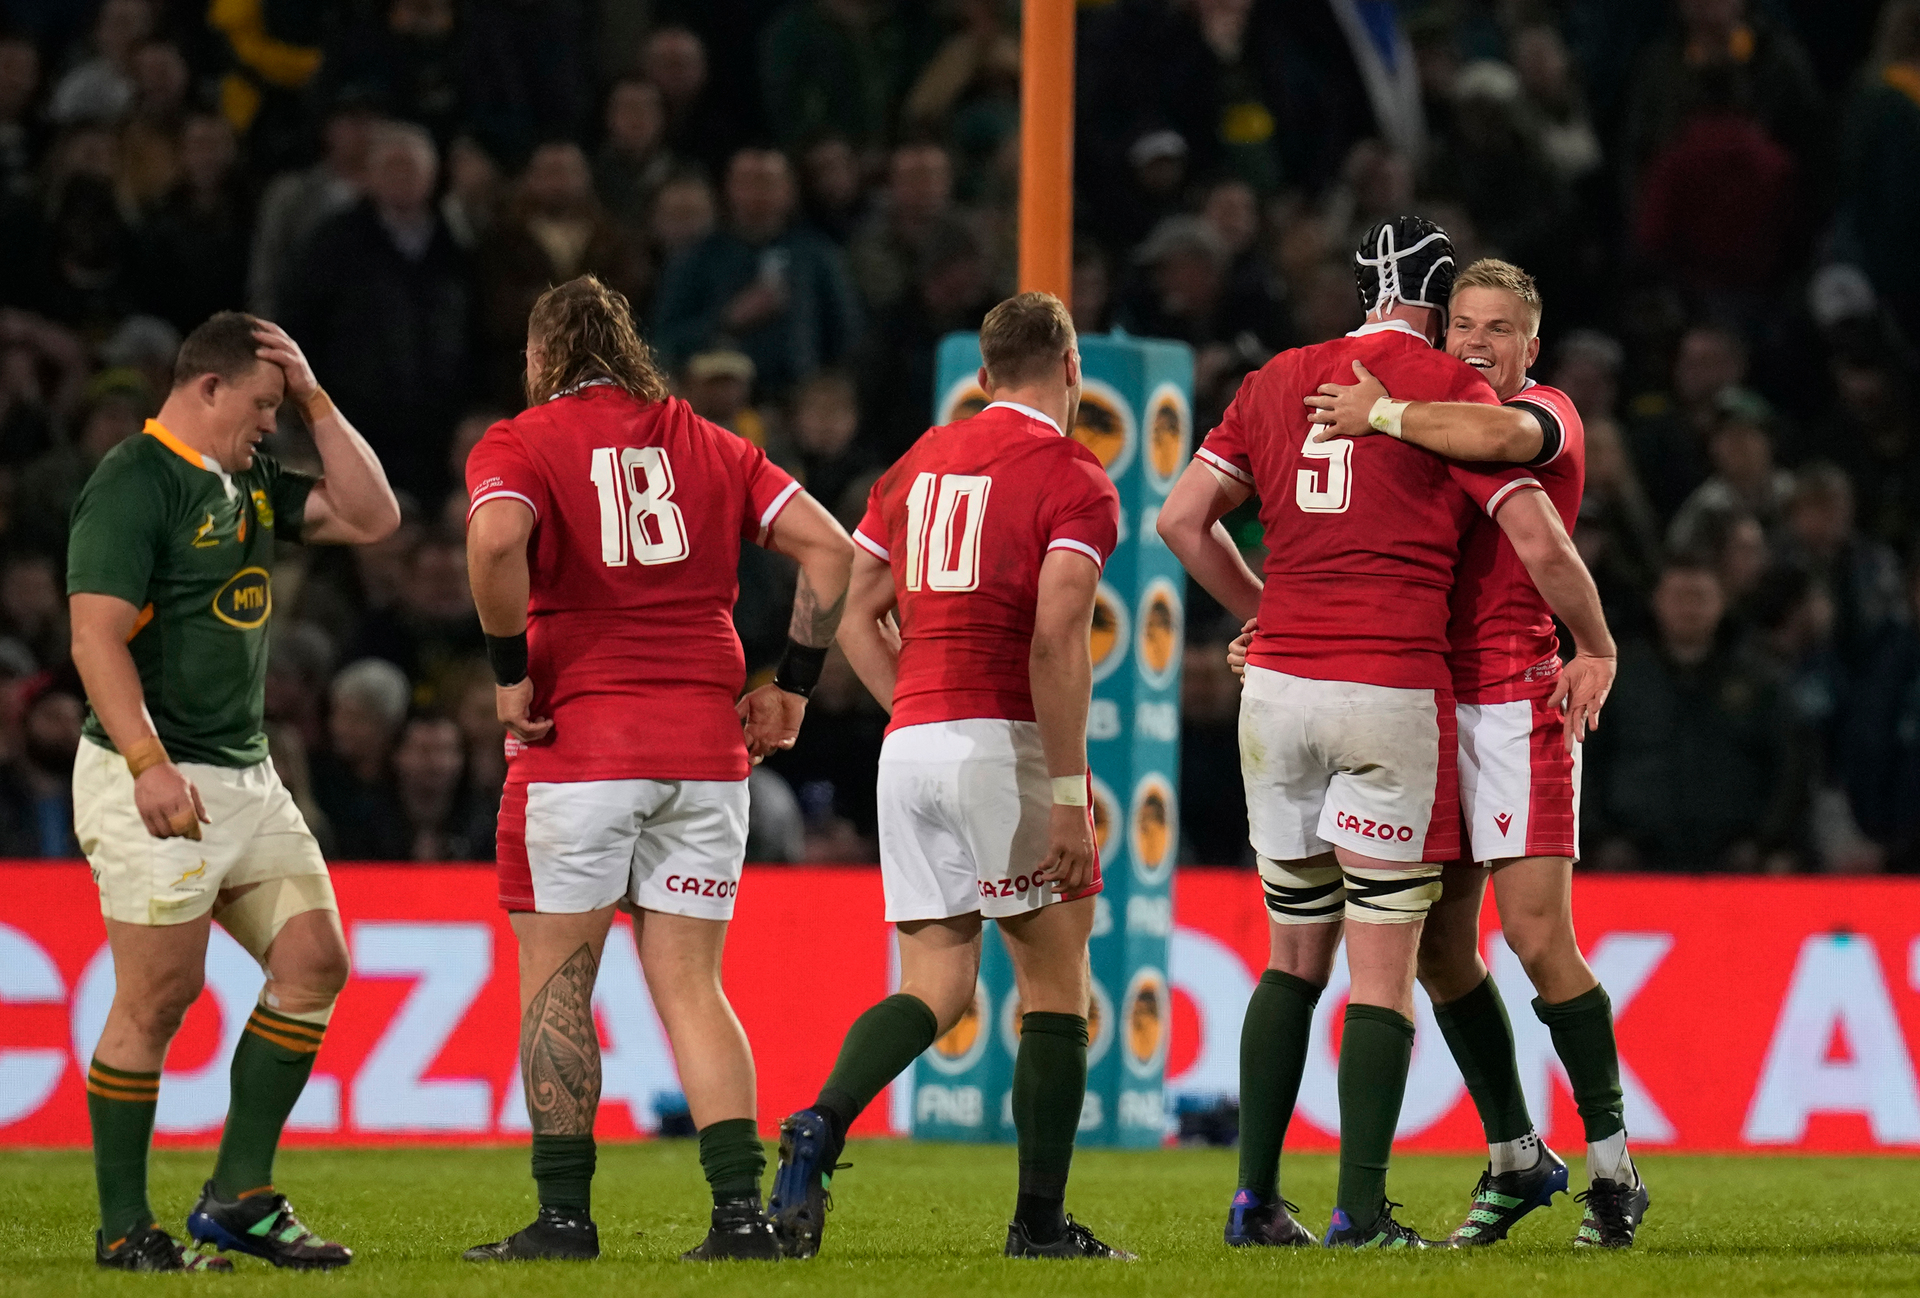 Rugby Wales beat Springboks 13-12 for historic win, level series 1-1